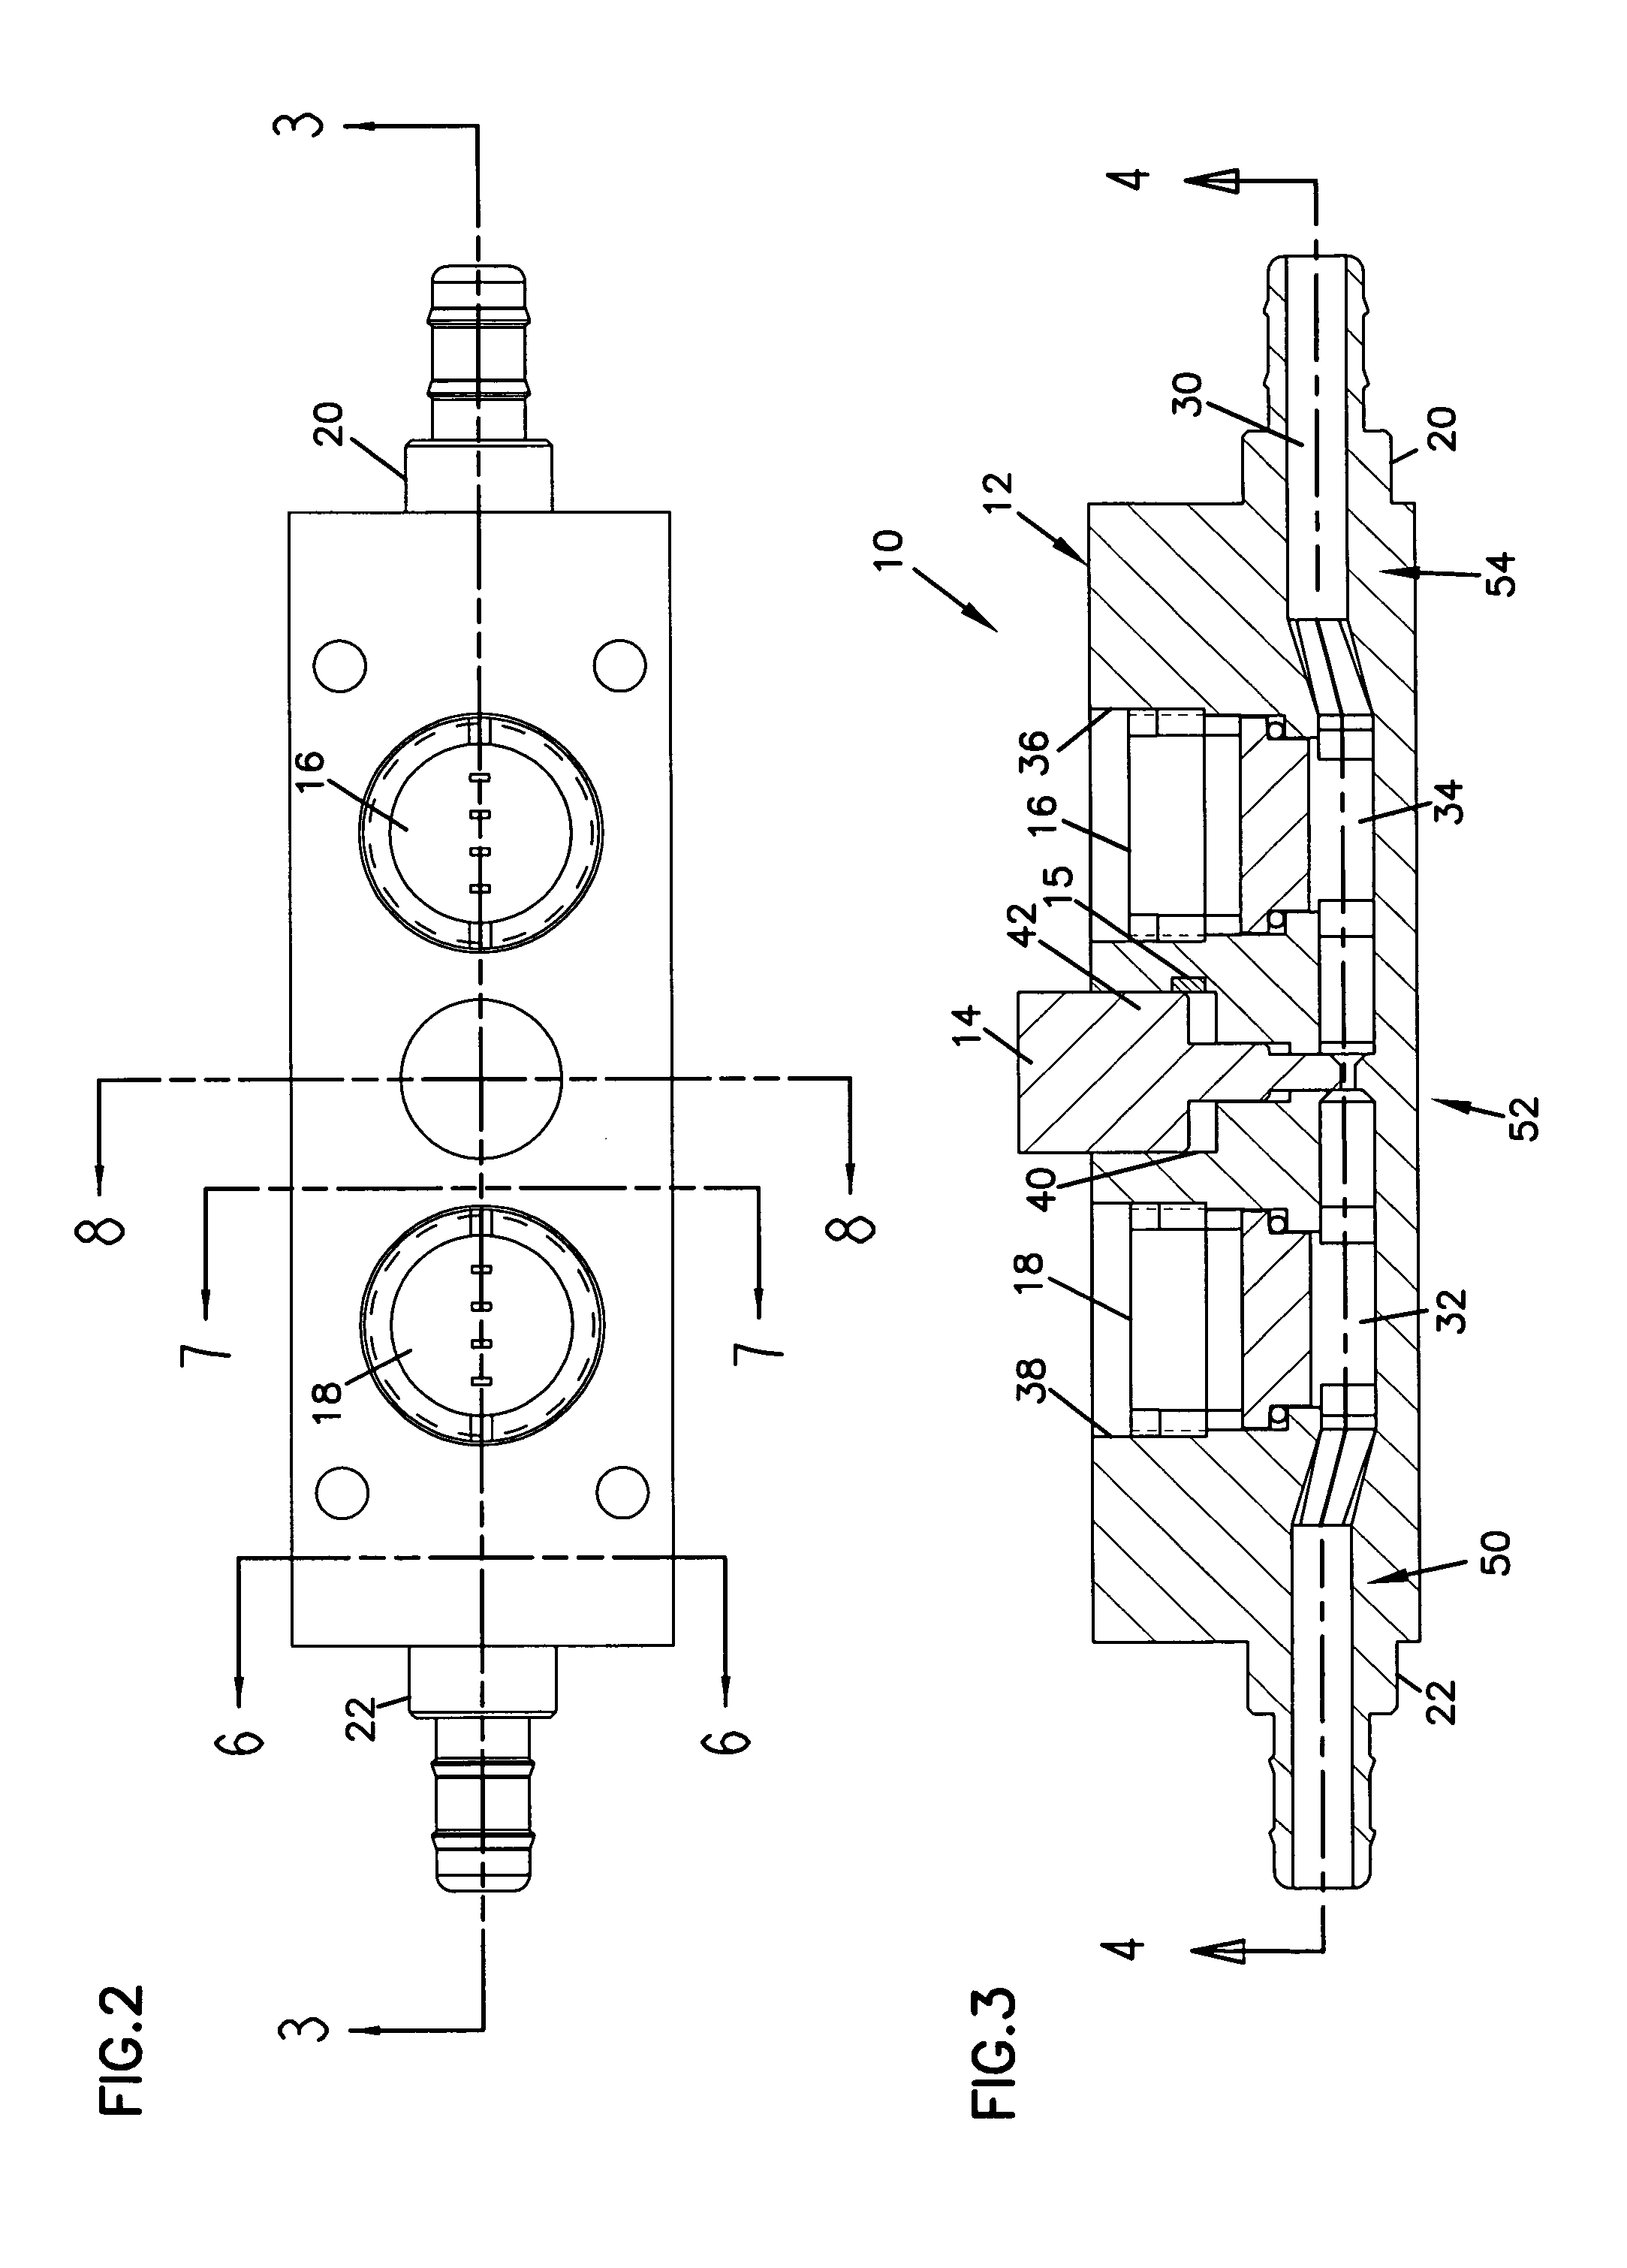 Software correction method and apparatus for a variable orifice flow meter